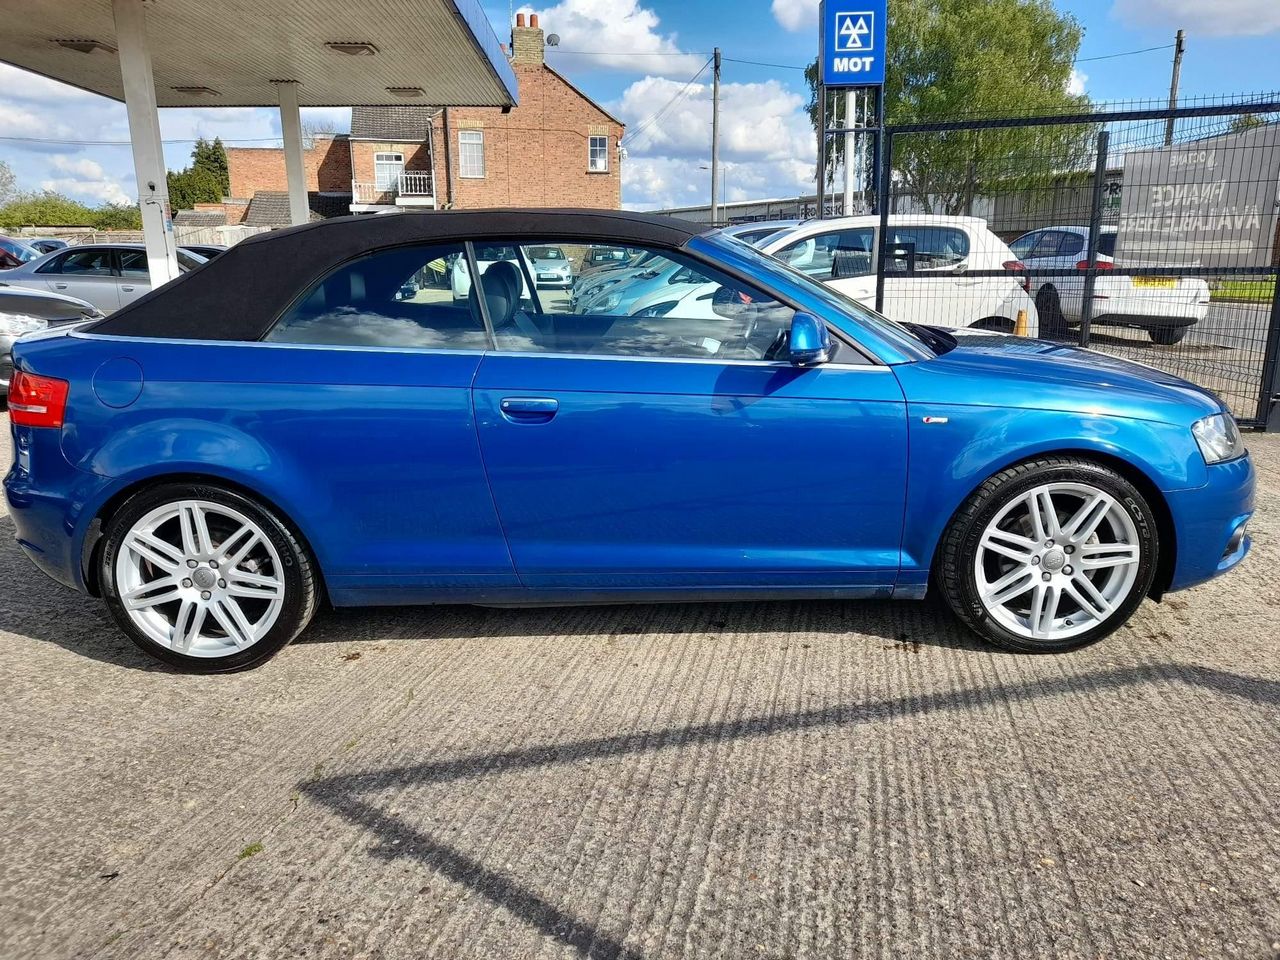 2009 Audi A3 Cabriolet 2.0 TDI S line Euro 4 2dr - Picture 6 of 37